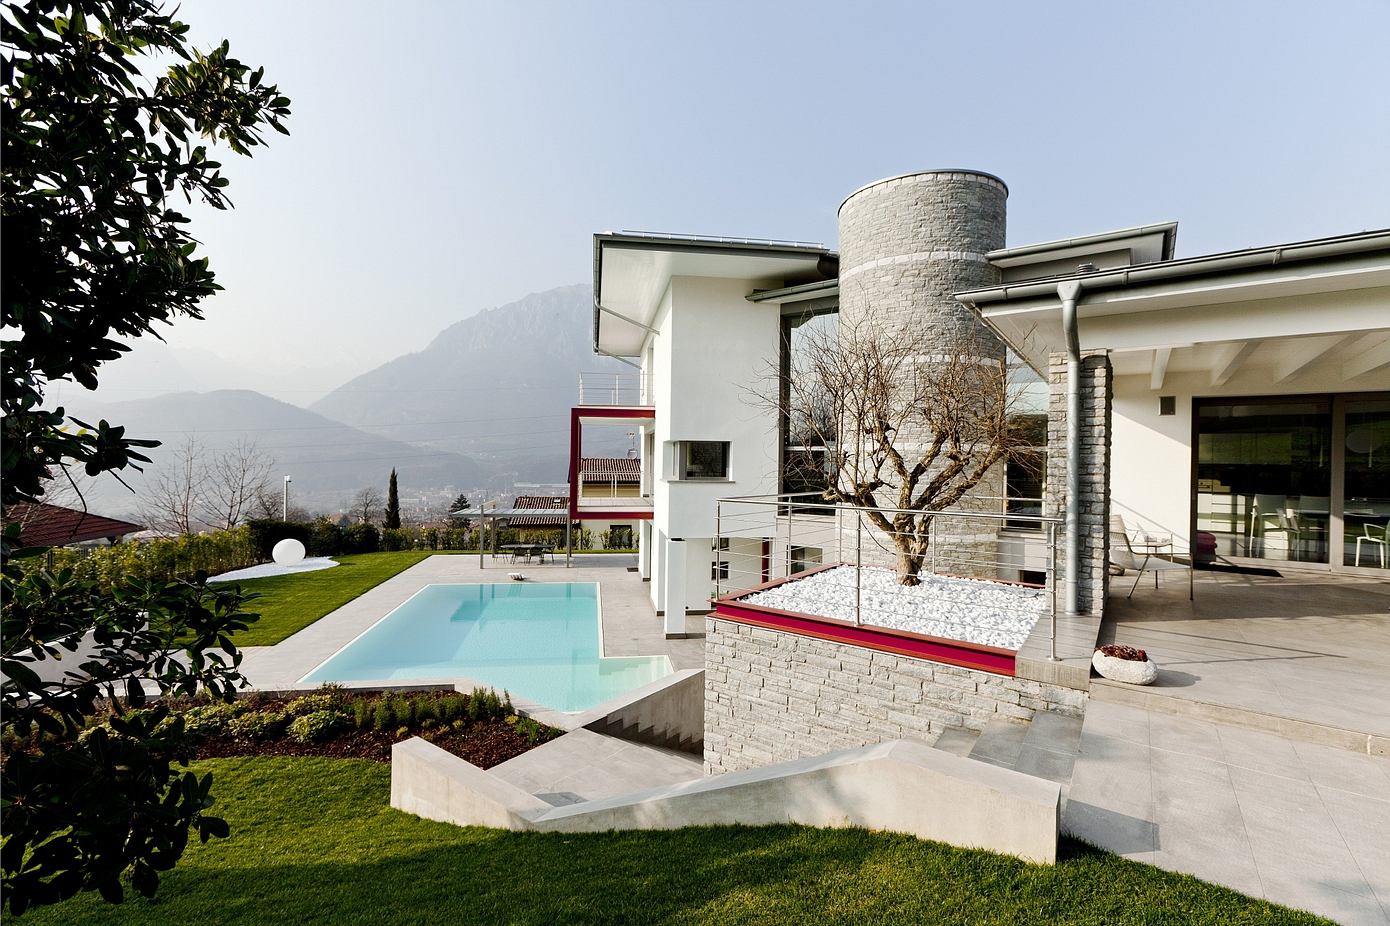 D House – Red Line: Inside Darfo Boario Terme’s Iconic Residence